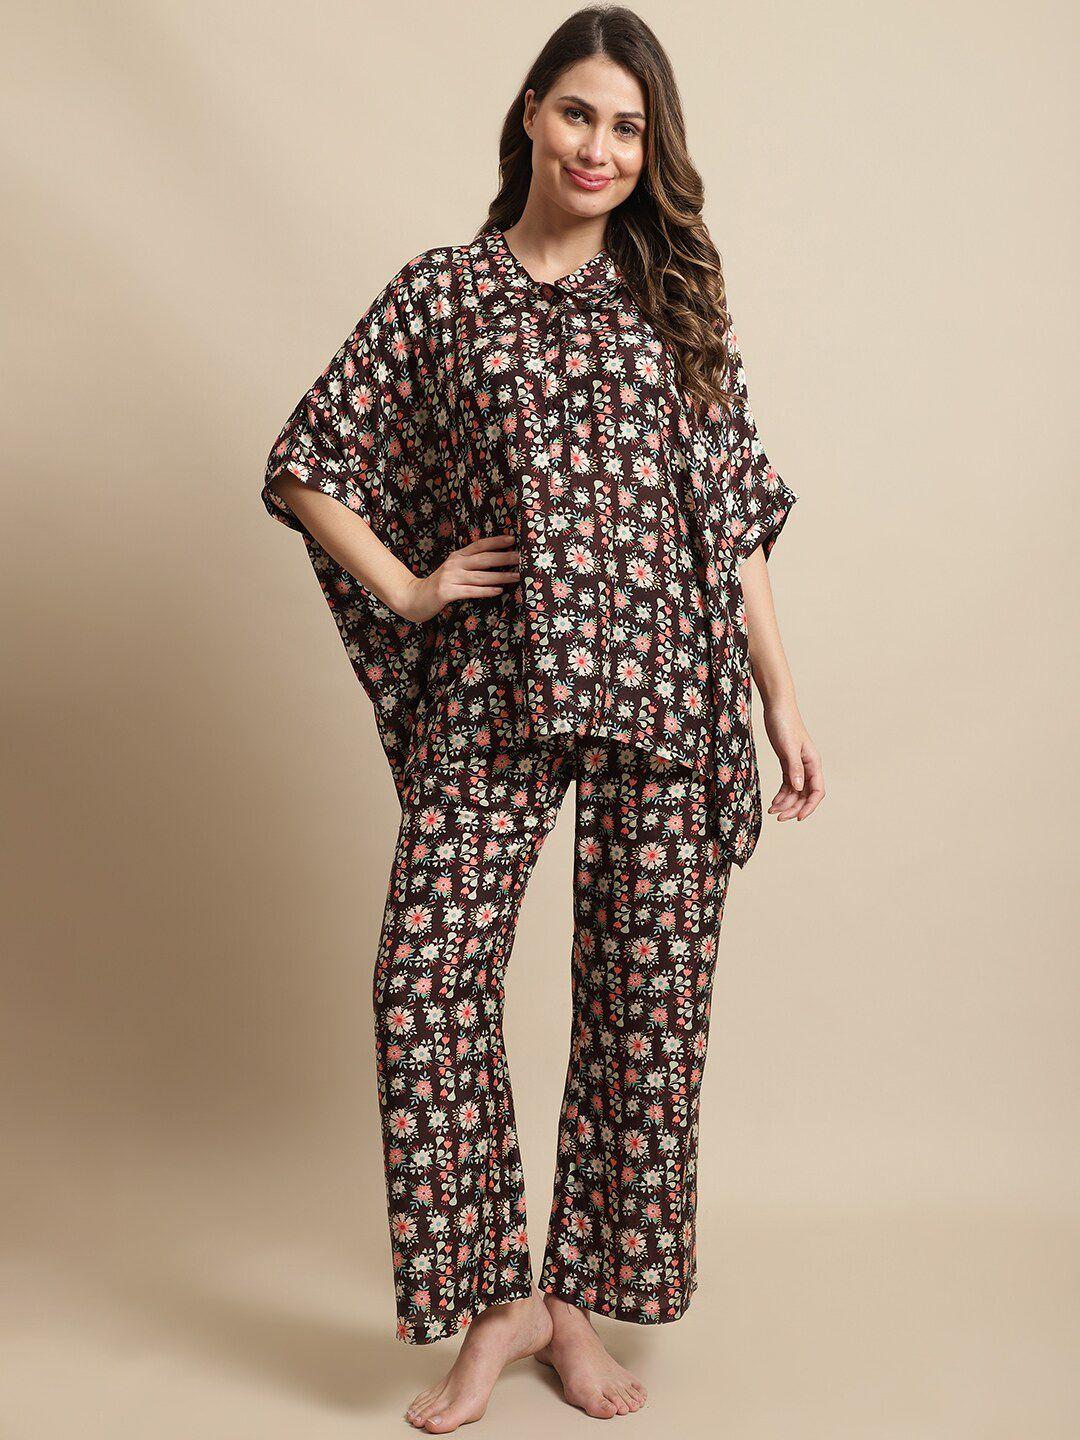 kanvin-floral-printed-night-suit